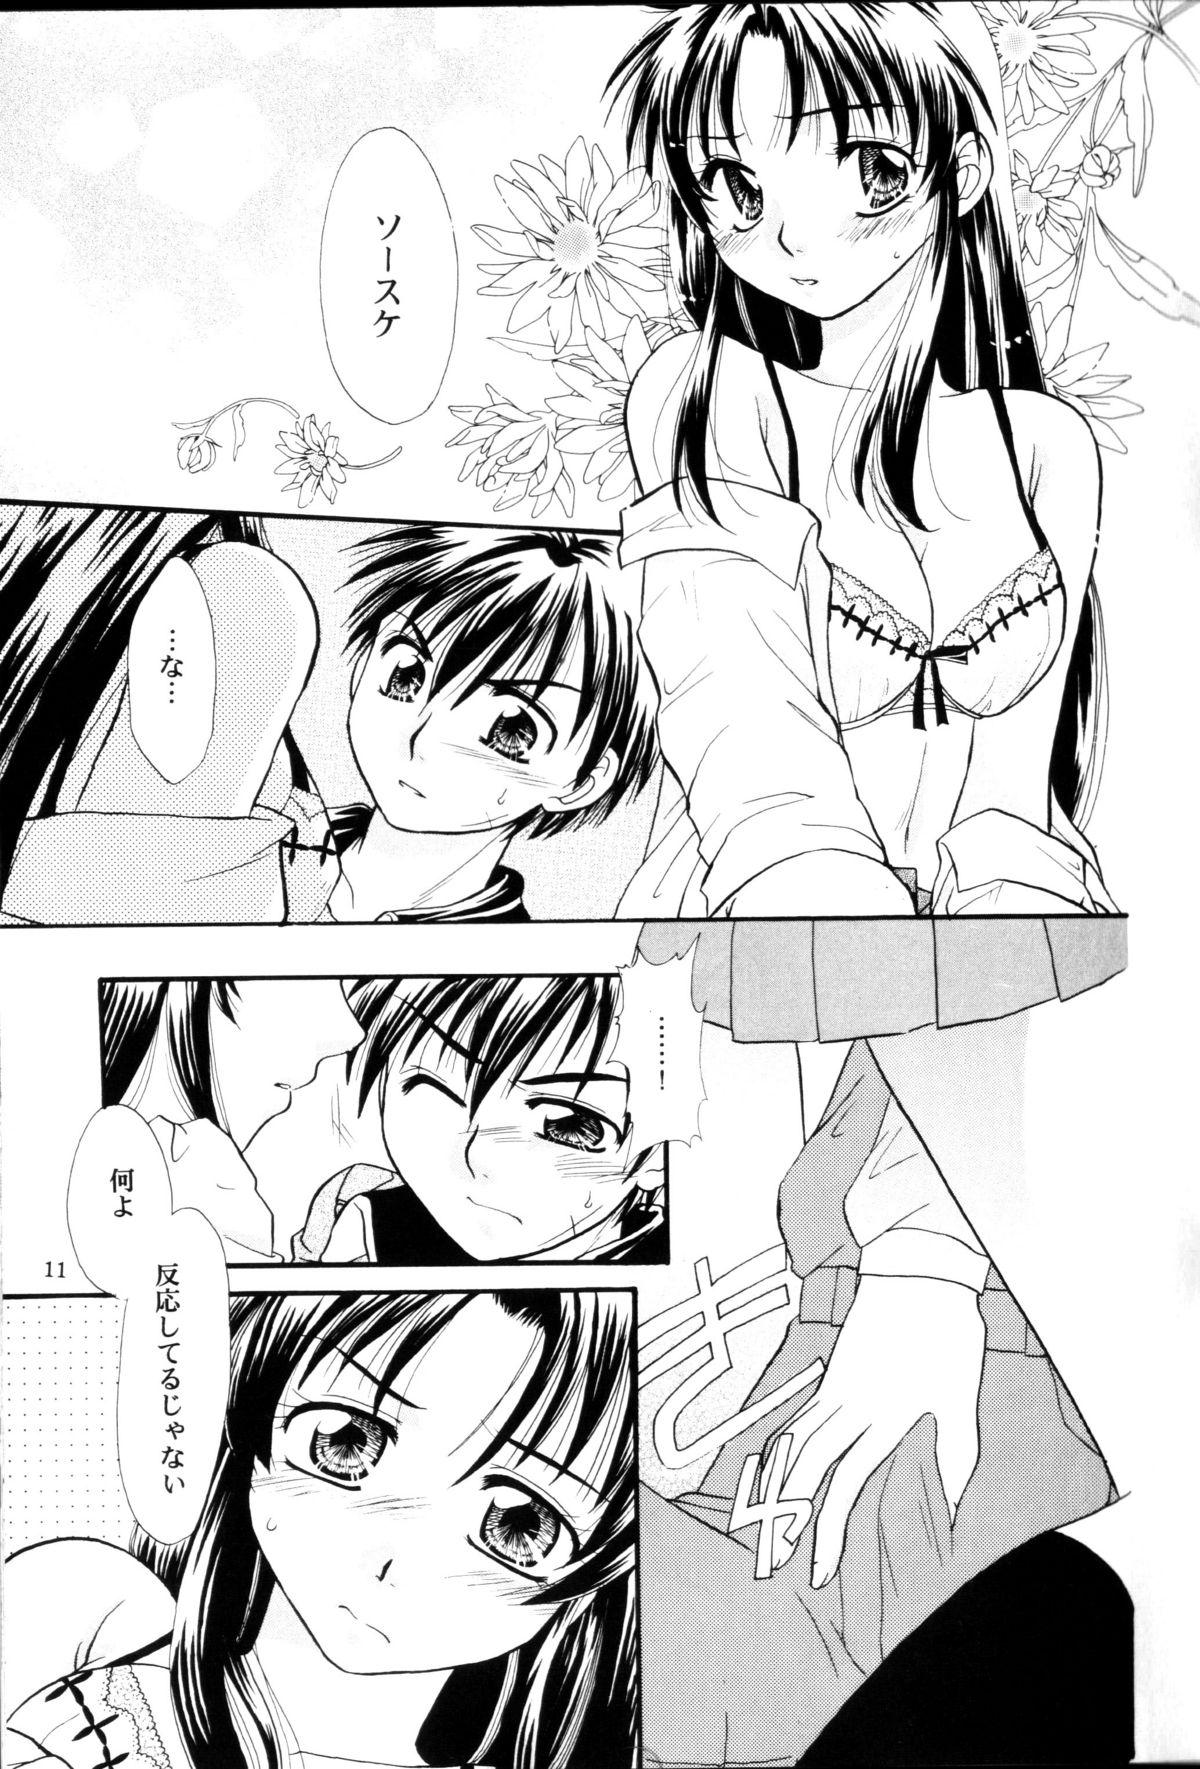 Bisex A.I. - Full metal panic Abuse - Page 10